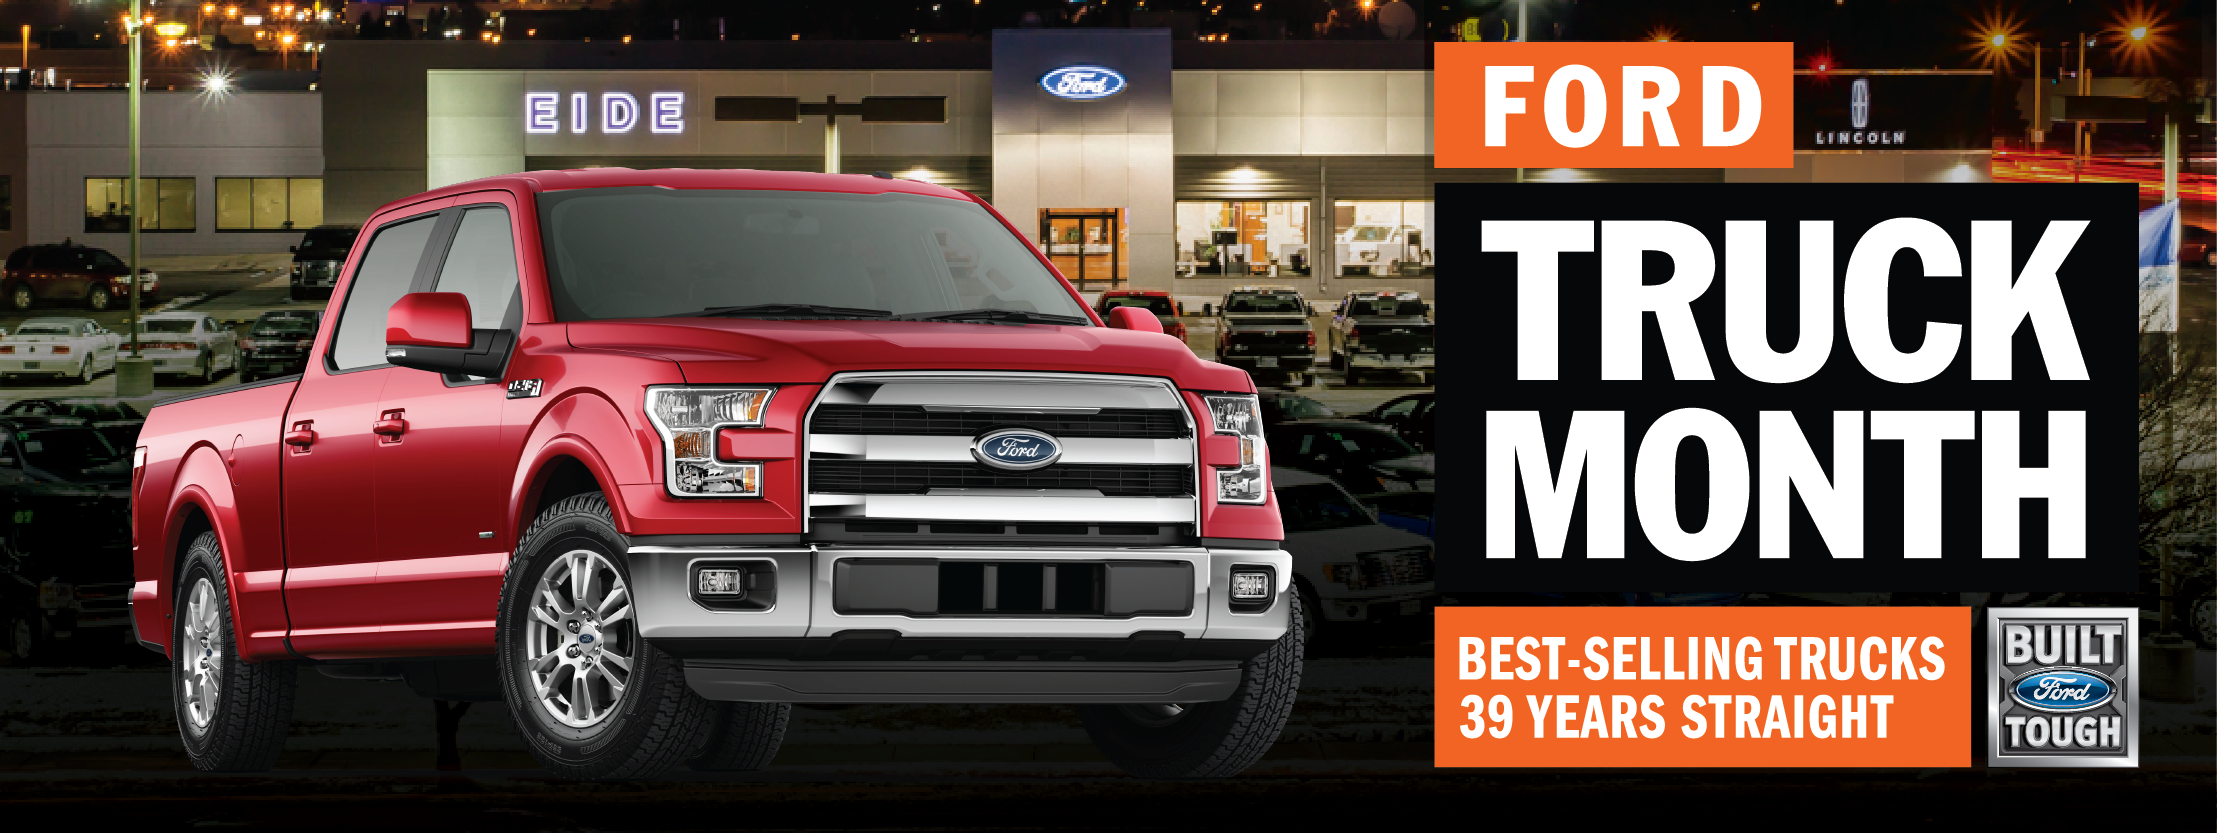 Ford Truck Month has Arrived at Eide Ford